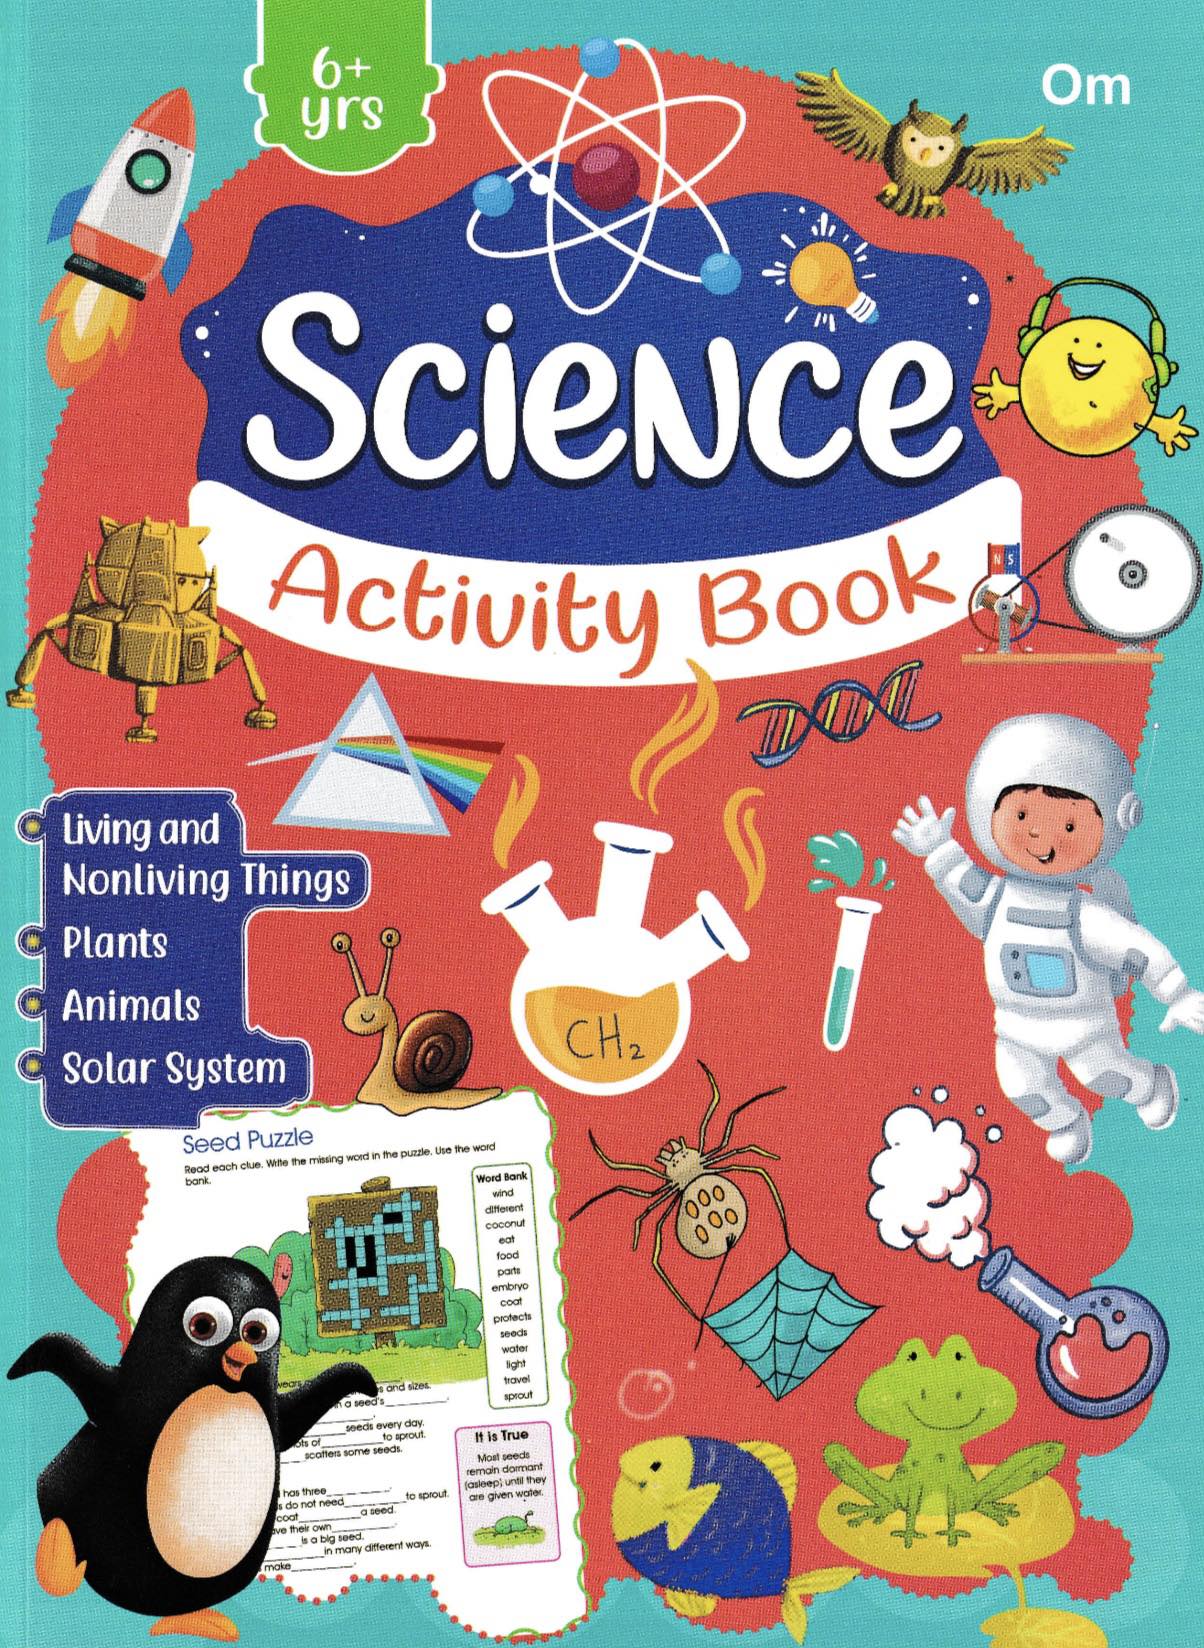 Science Activity Book for Age 6+